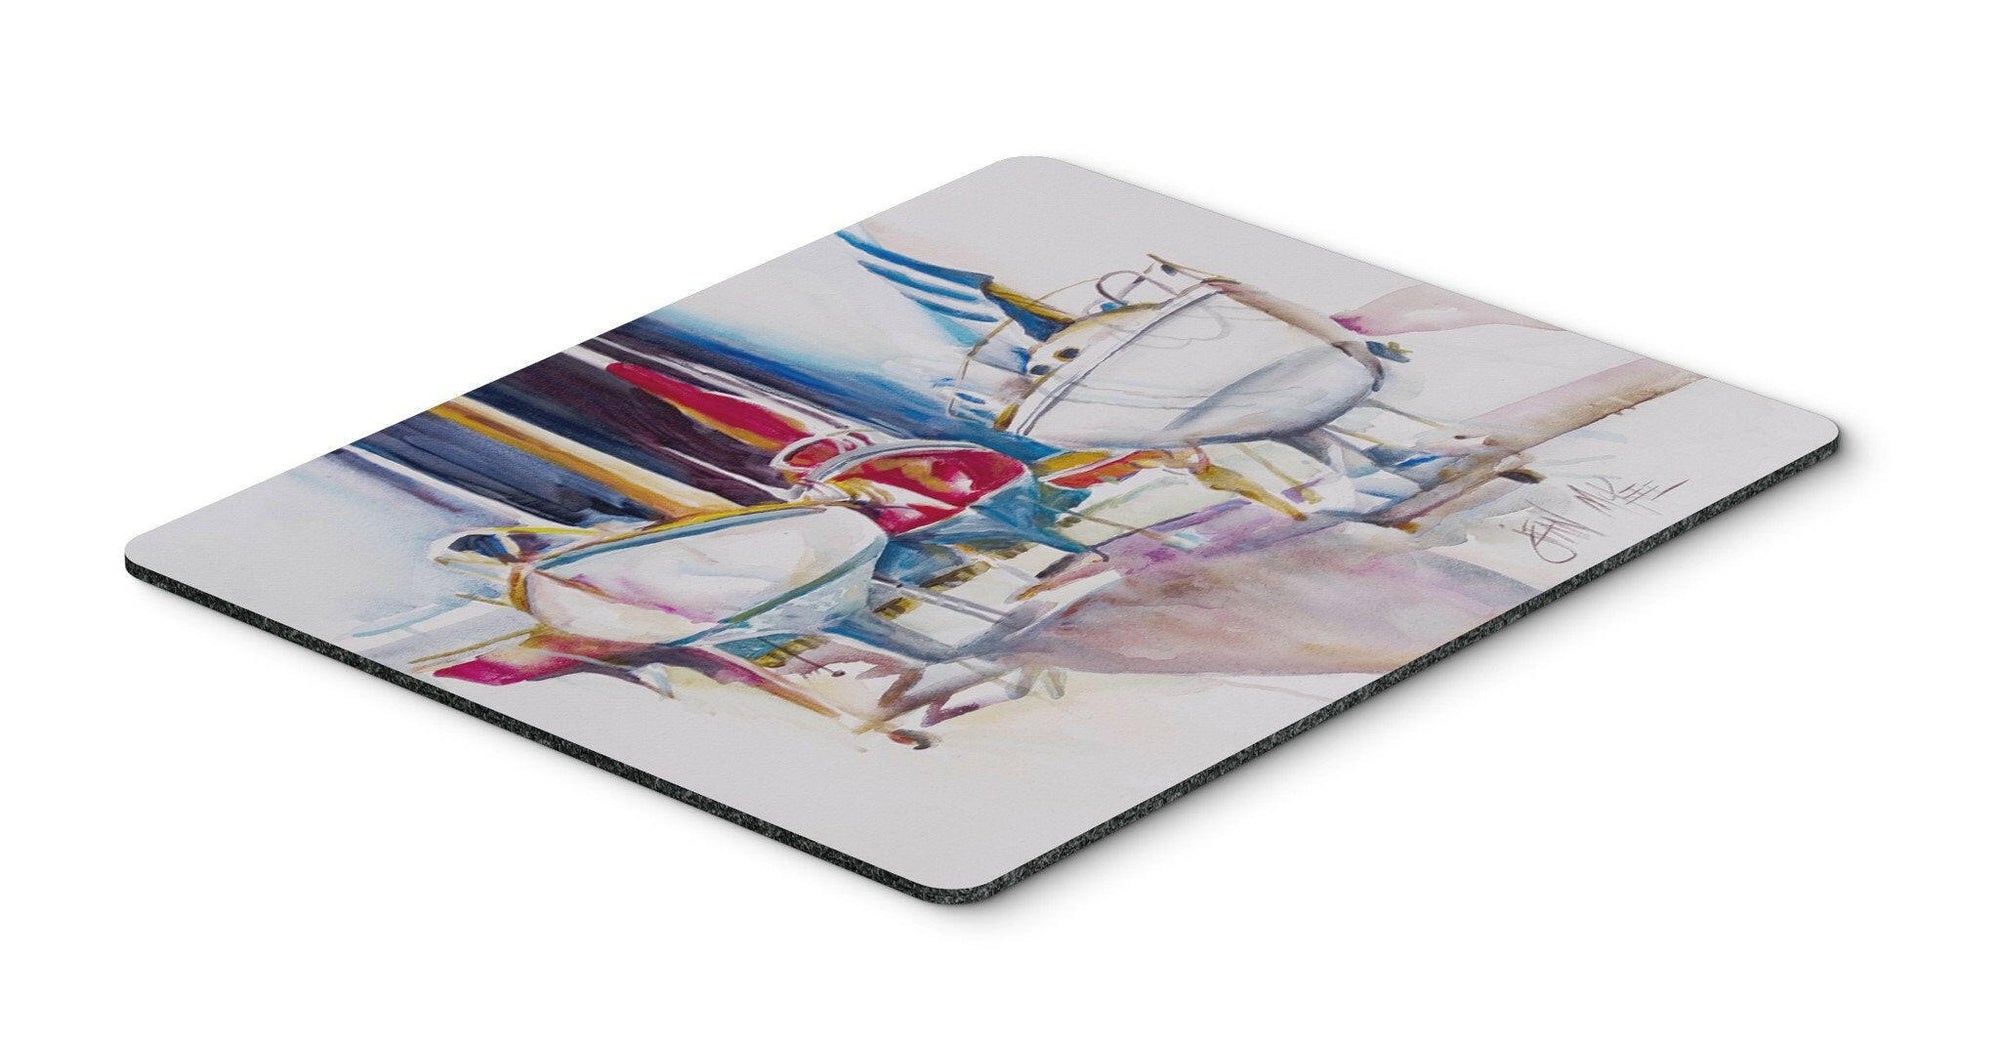 Sailboats in Dry Dock Mouse Pad, Hot Pad or Trivet JMK1039MP by Caroline's Treasures